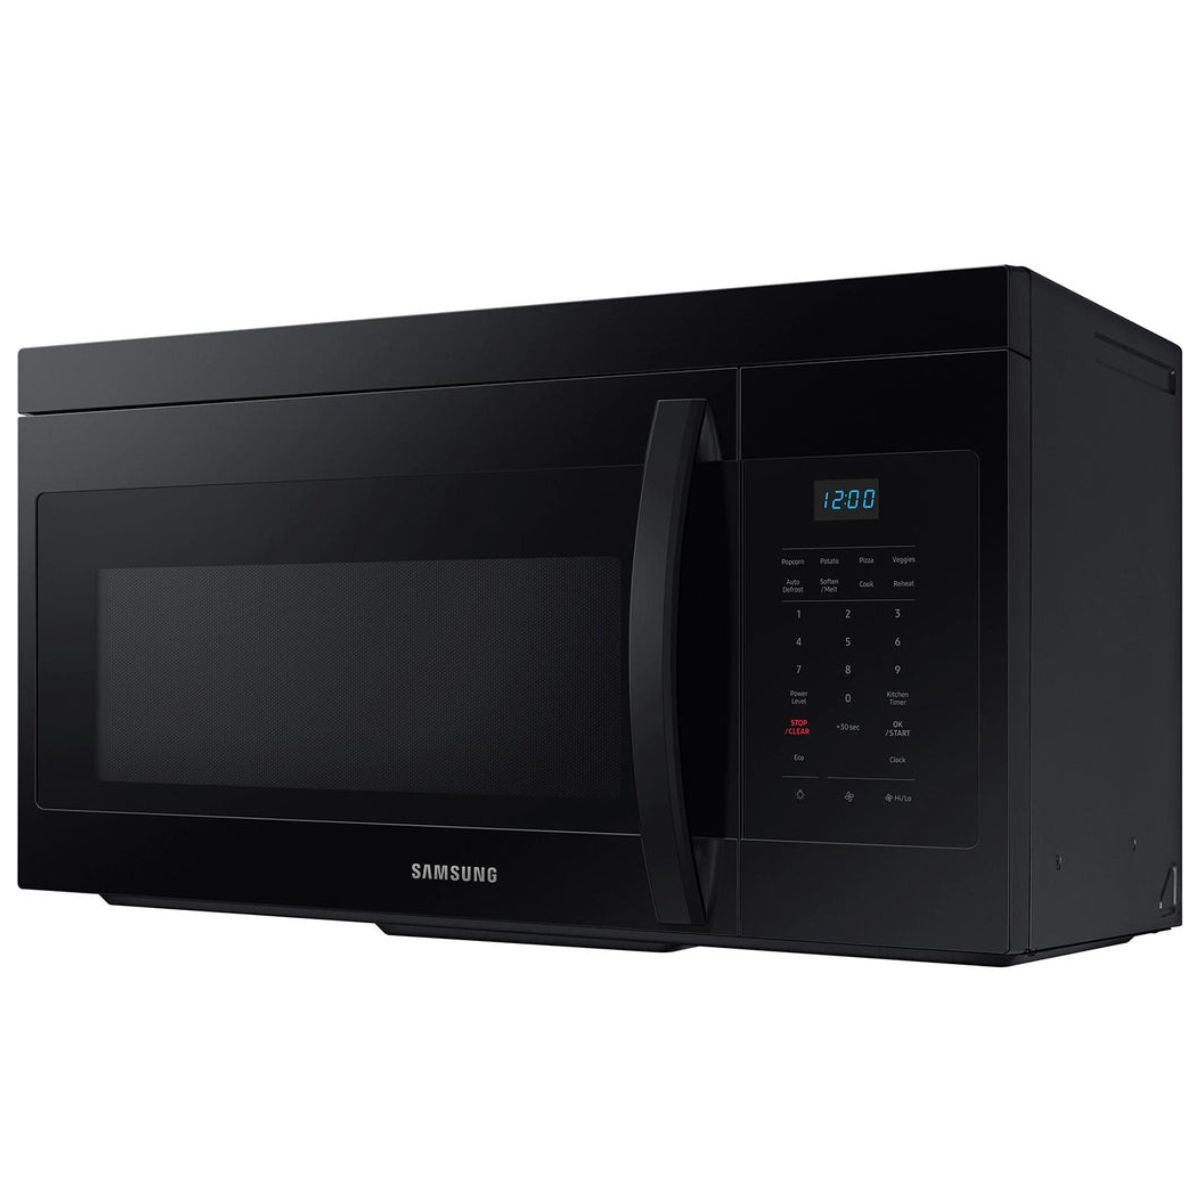 How To Fix The Error Code E-T2 For Samsung Microwave